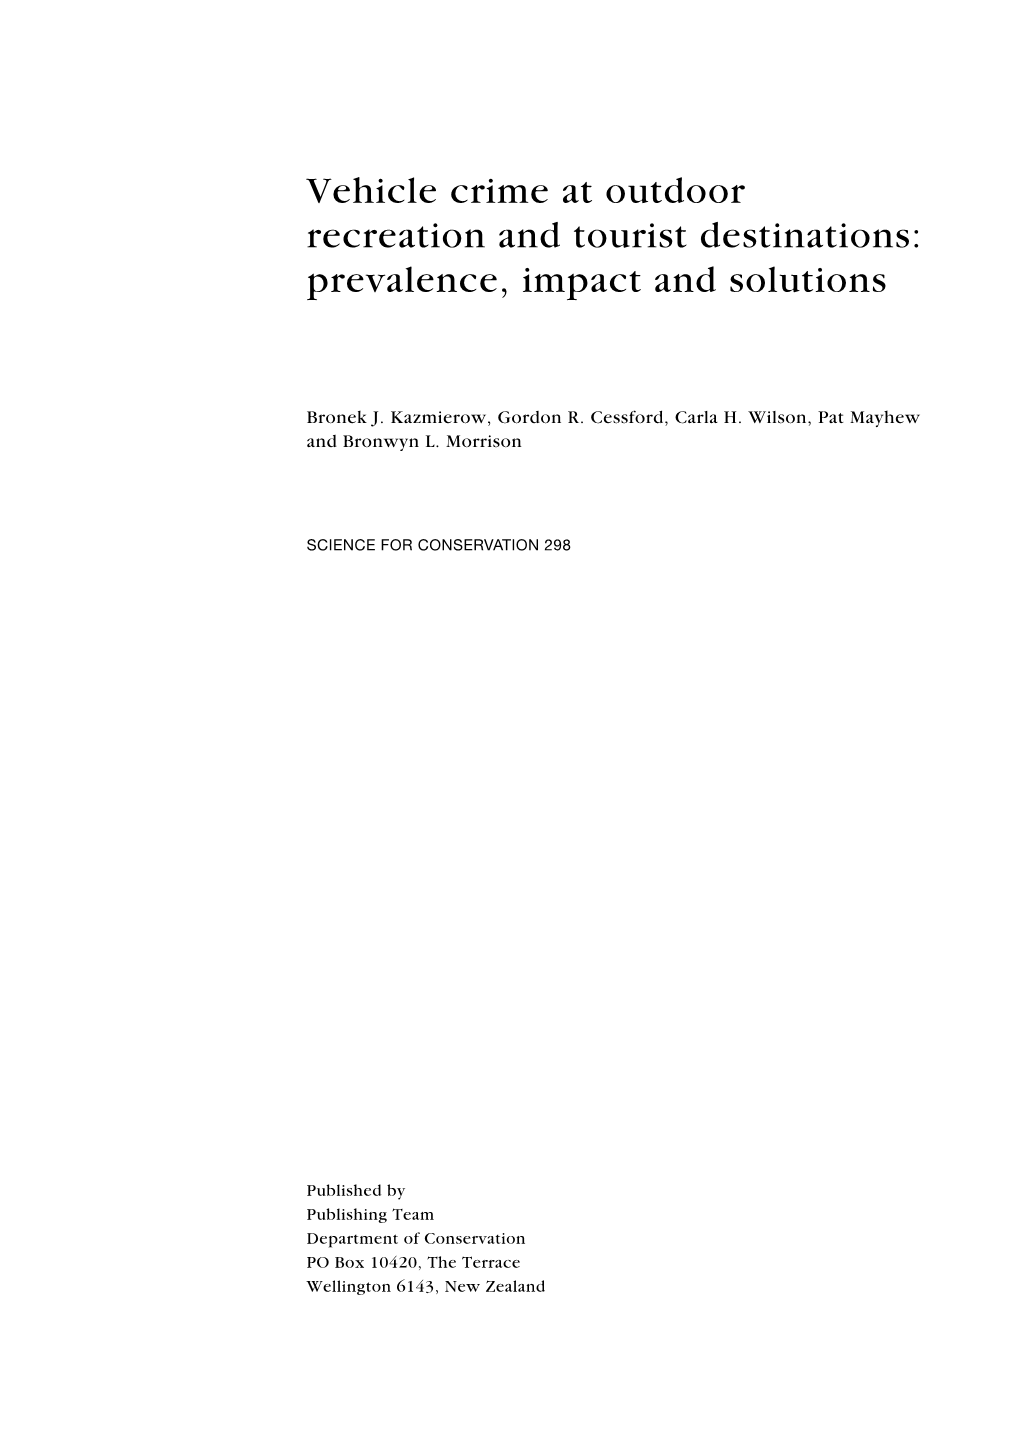 Vehicle Crime at Outdoor Recreation and Tourist Destinations: Prevalence, Impact and Solutions